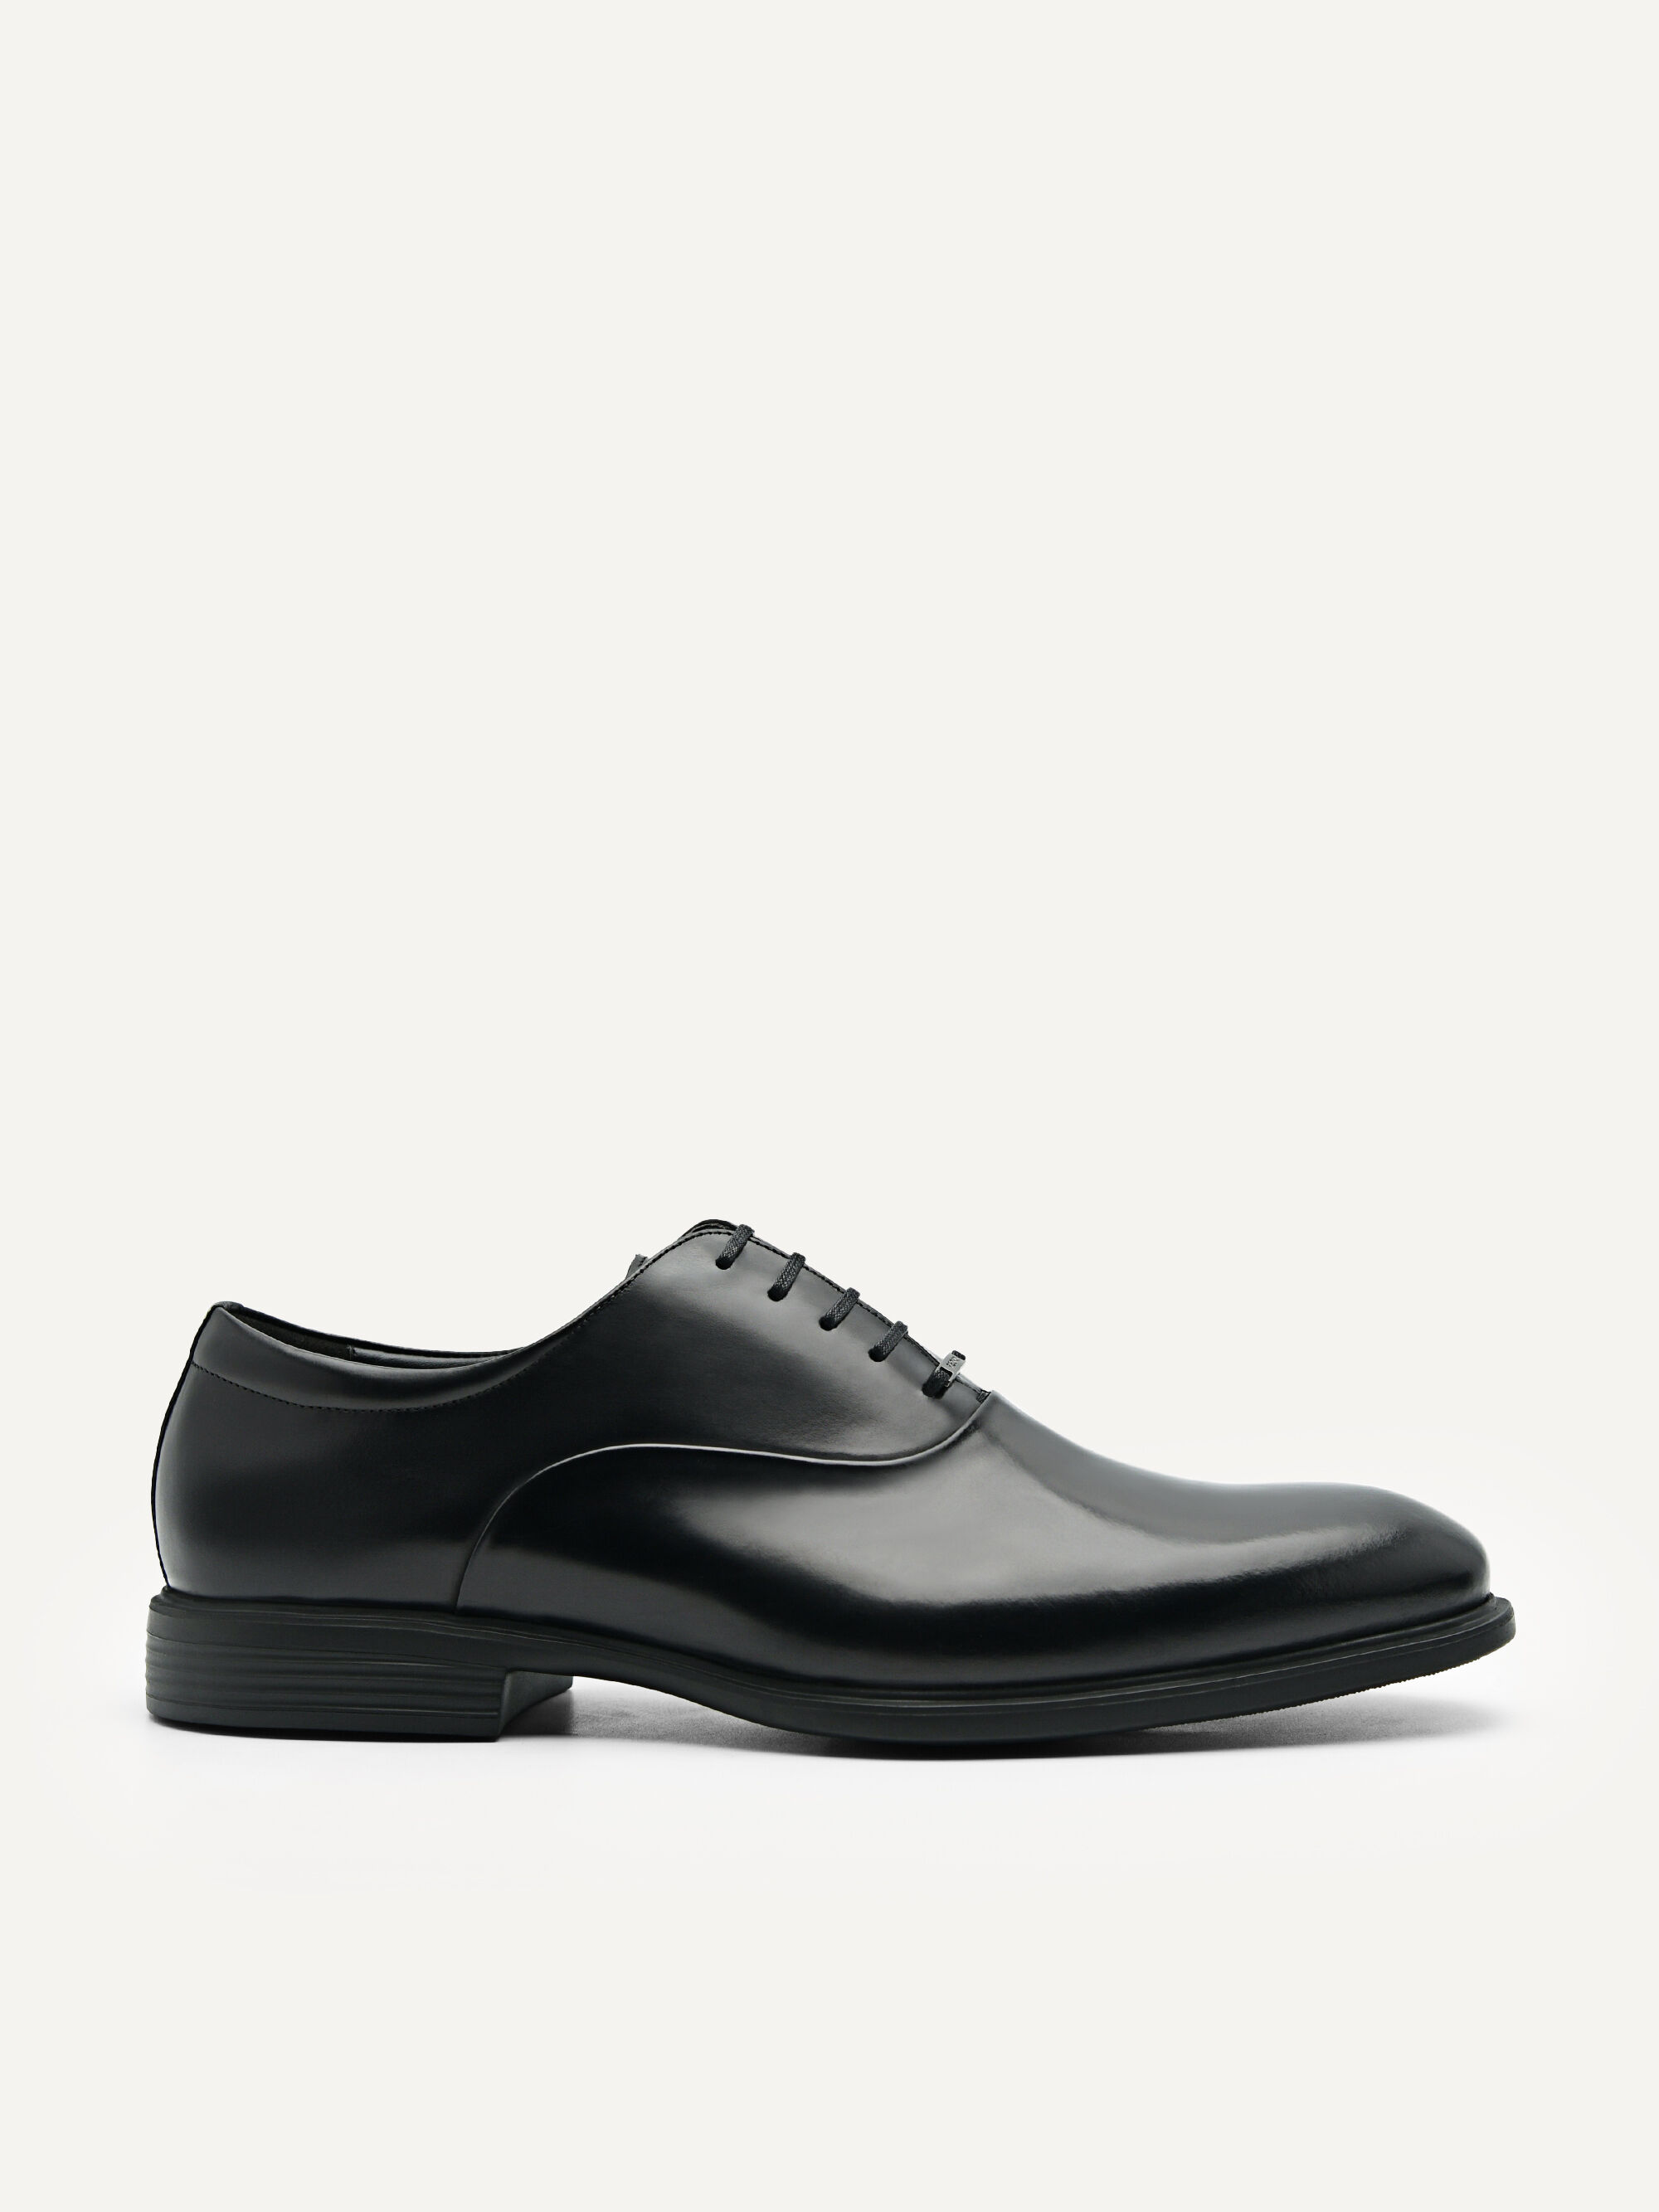 Altitude Lightweight Leather Oxford Shoes - Black